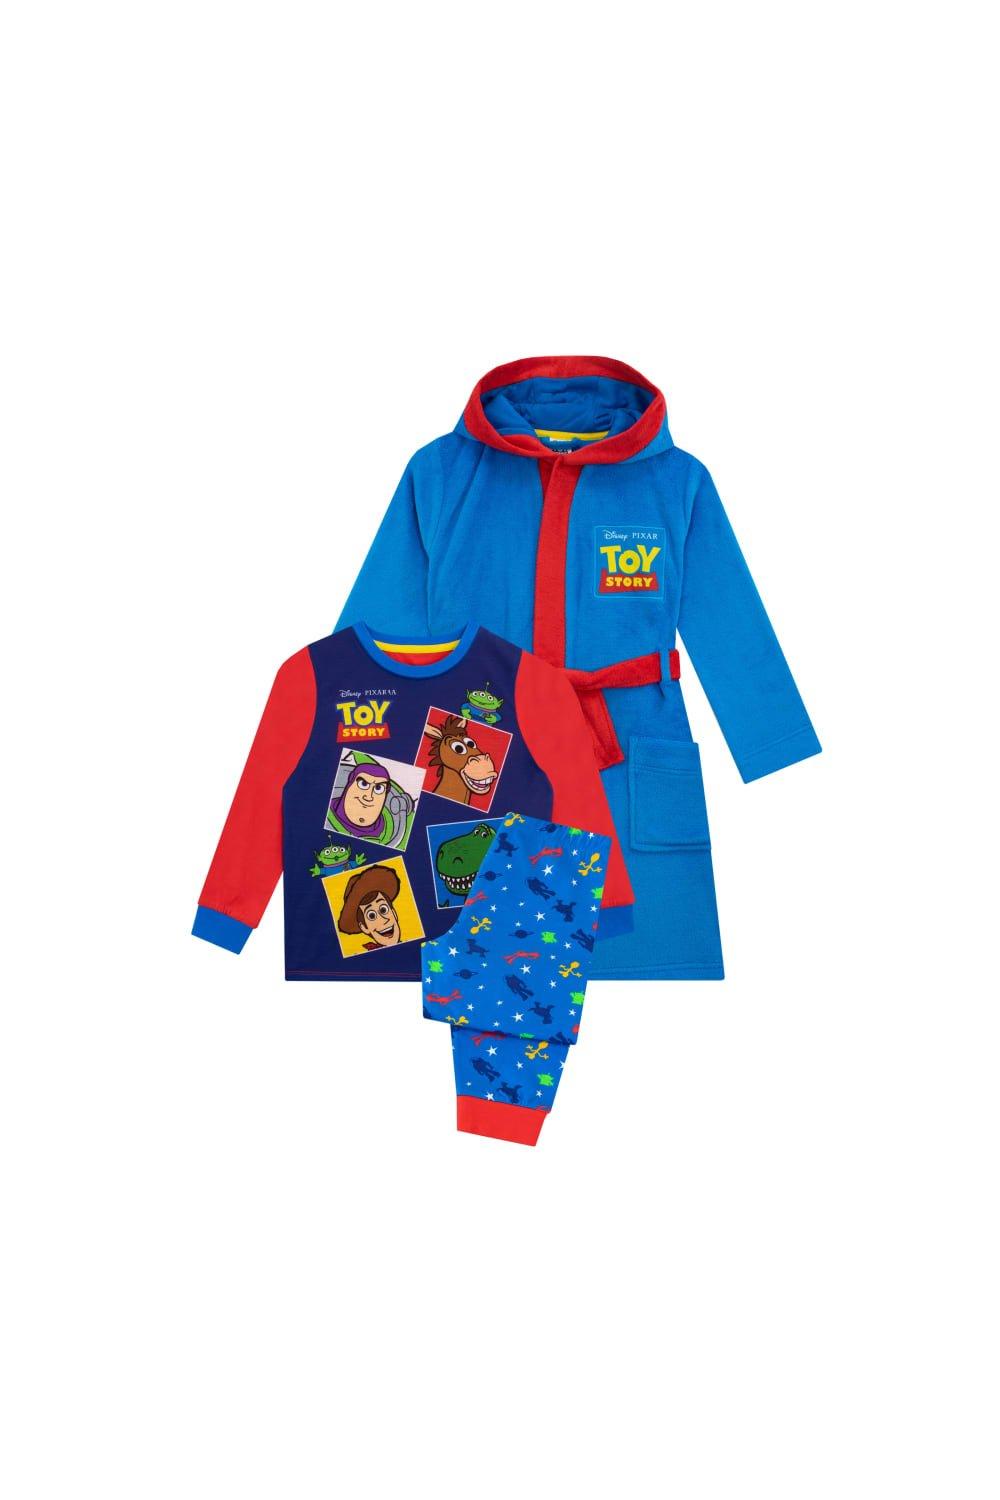 Toy Story Pyjamas And Dressing Gown